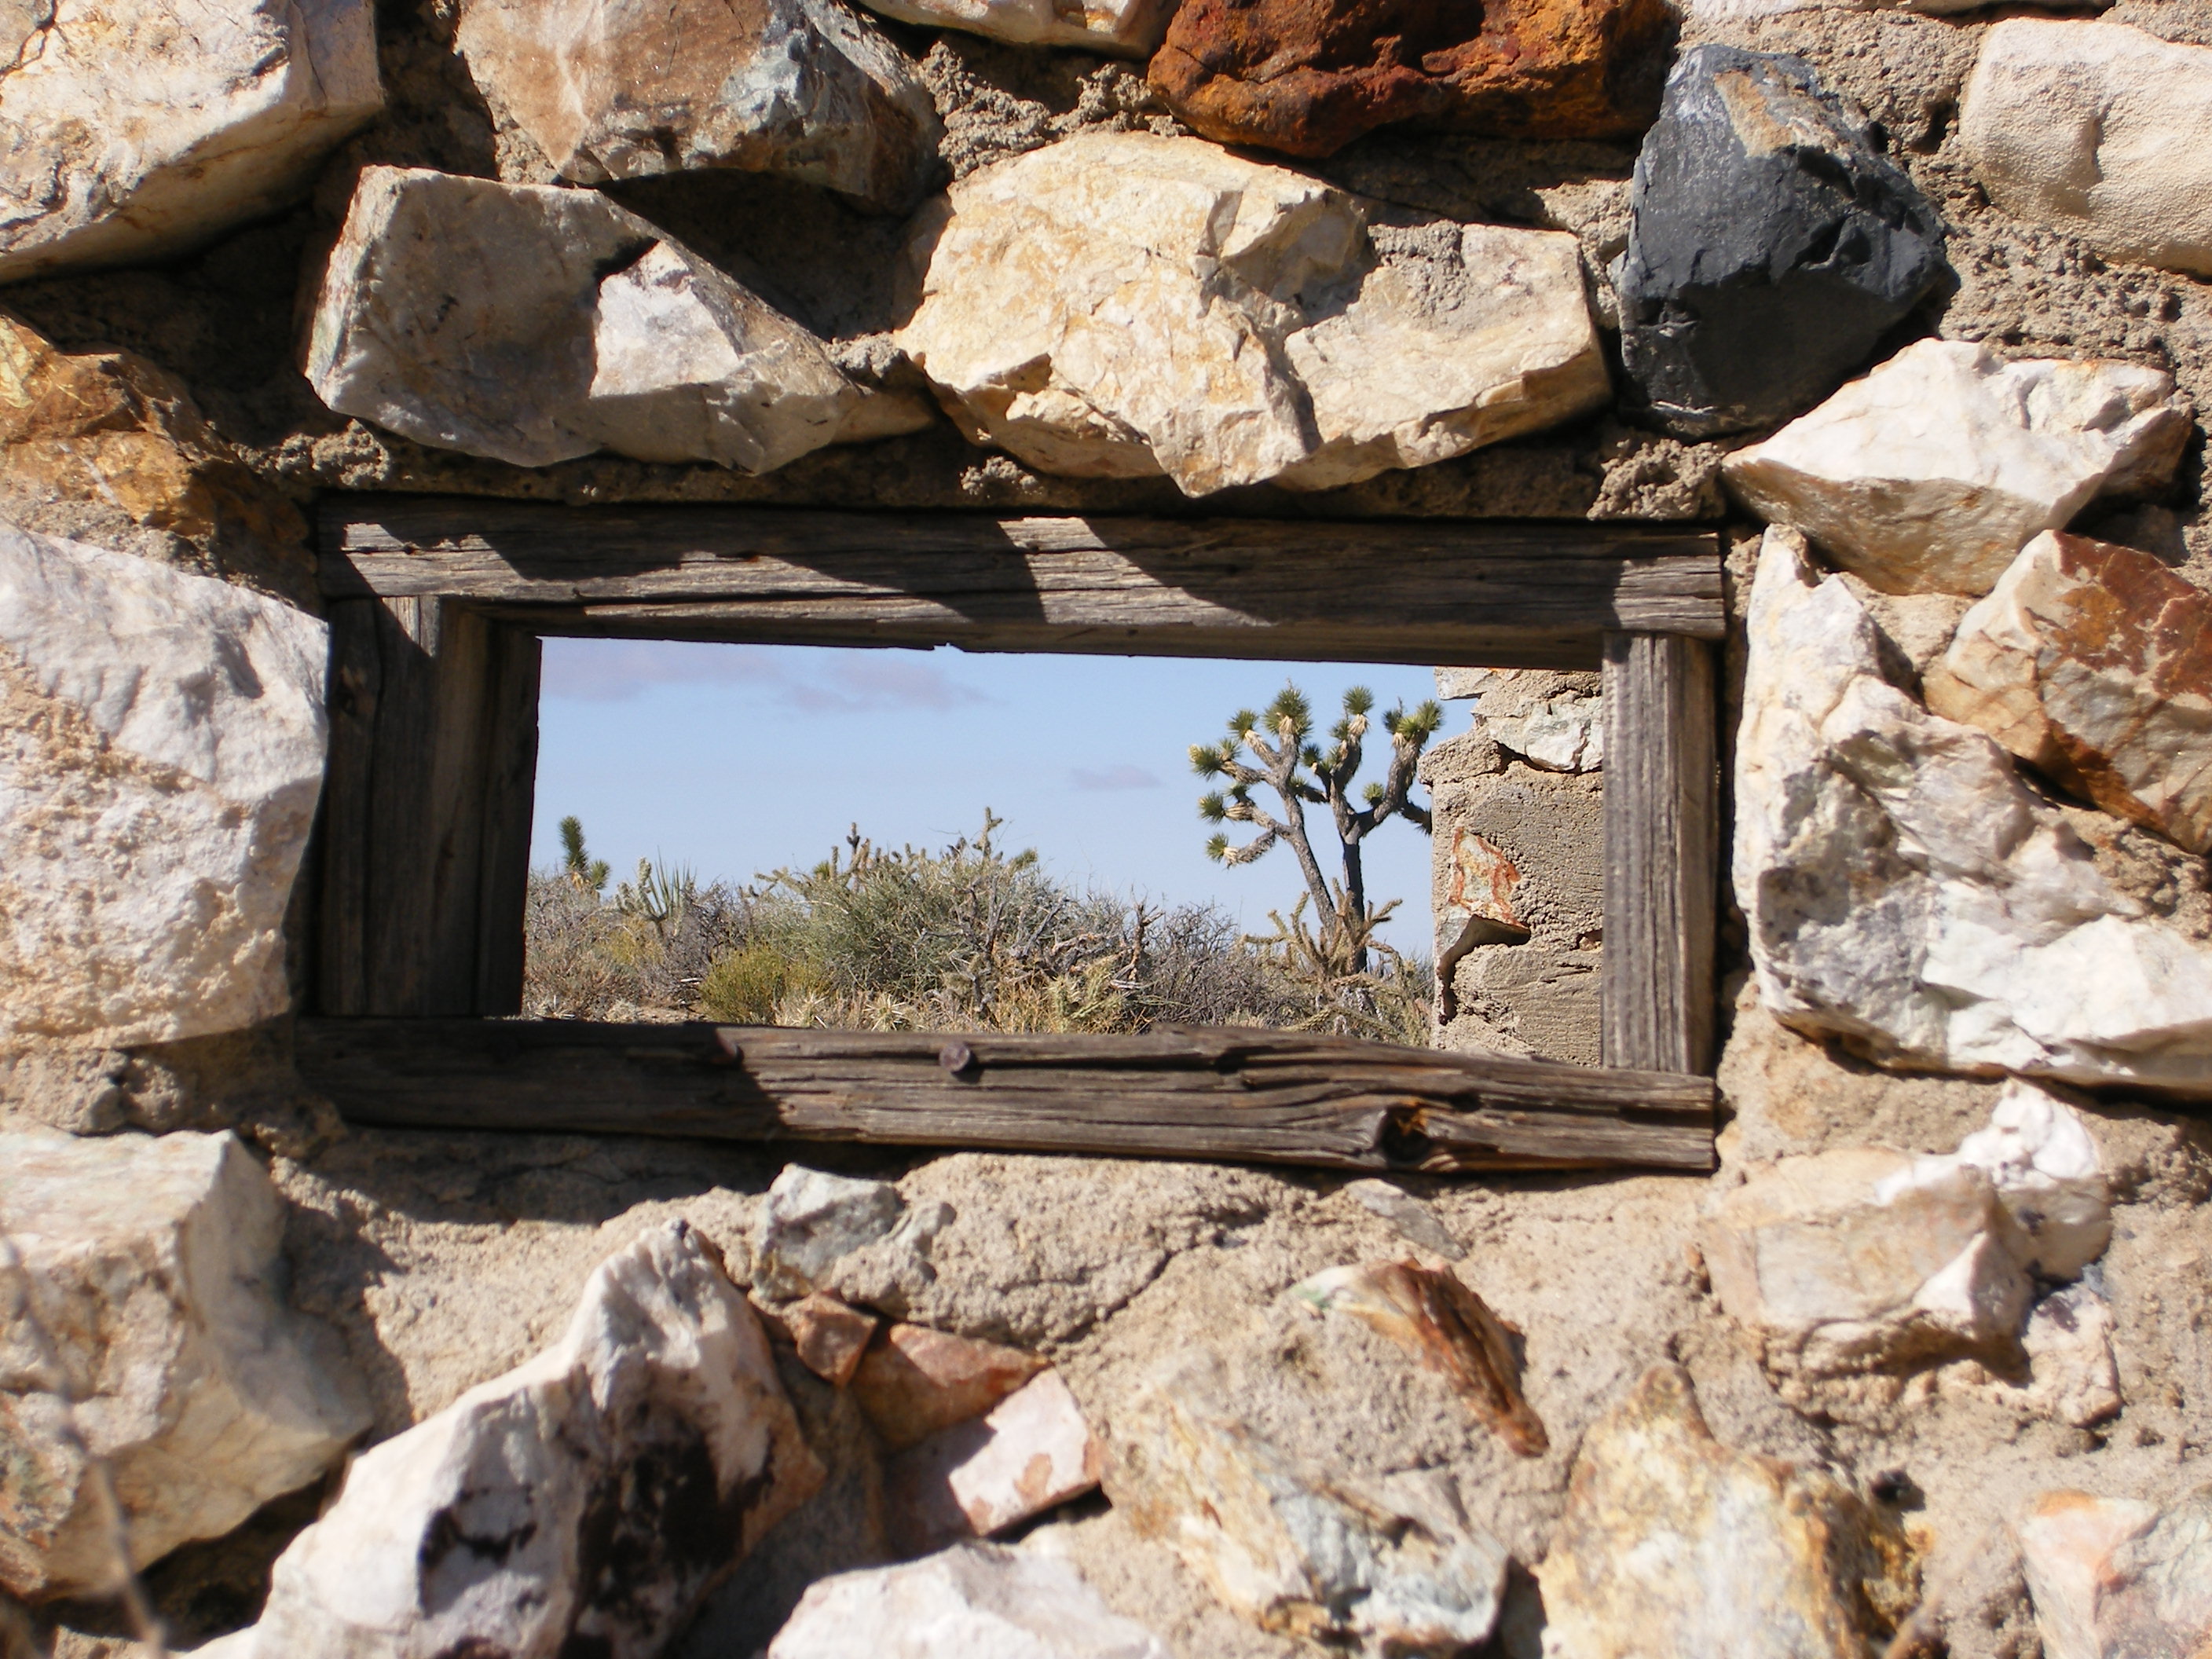 A Joshua tree seen though the window of an old miner's cabin